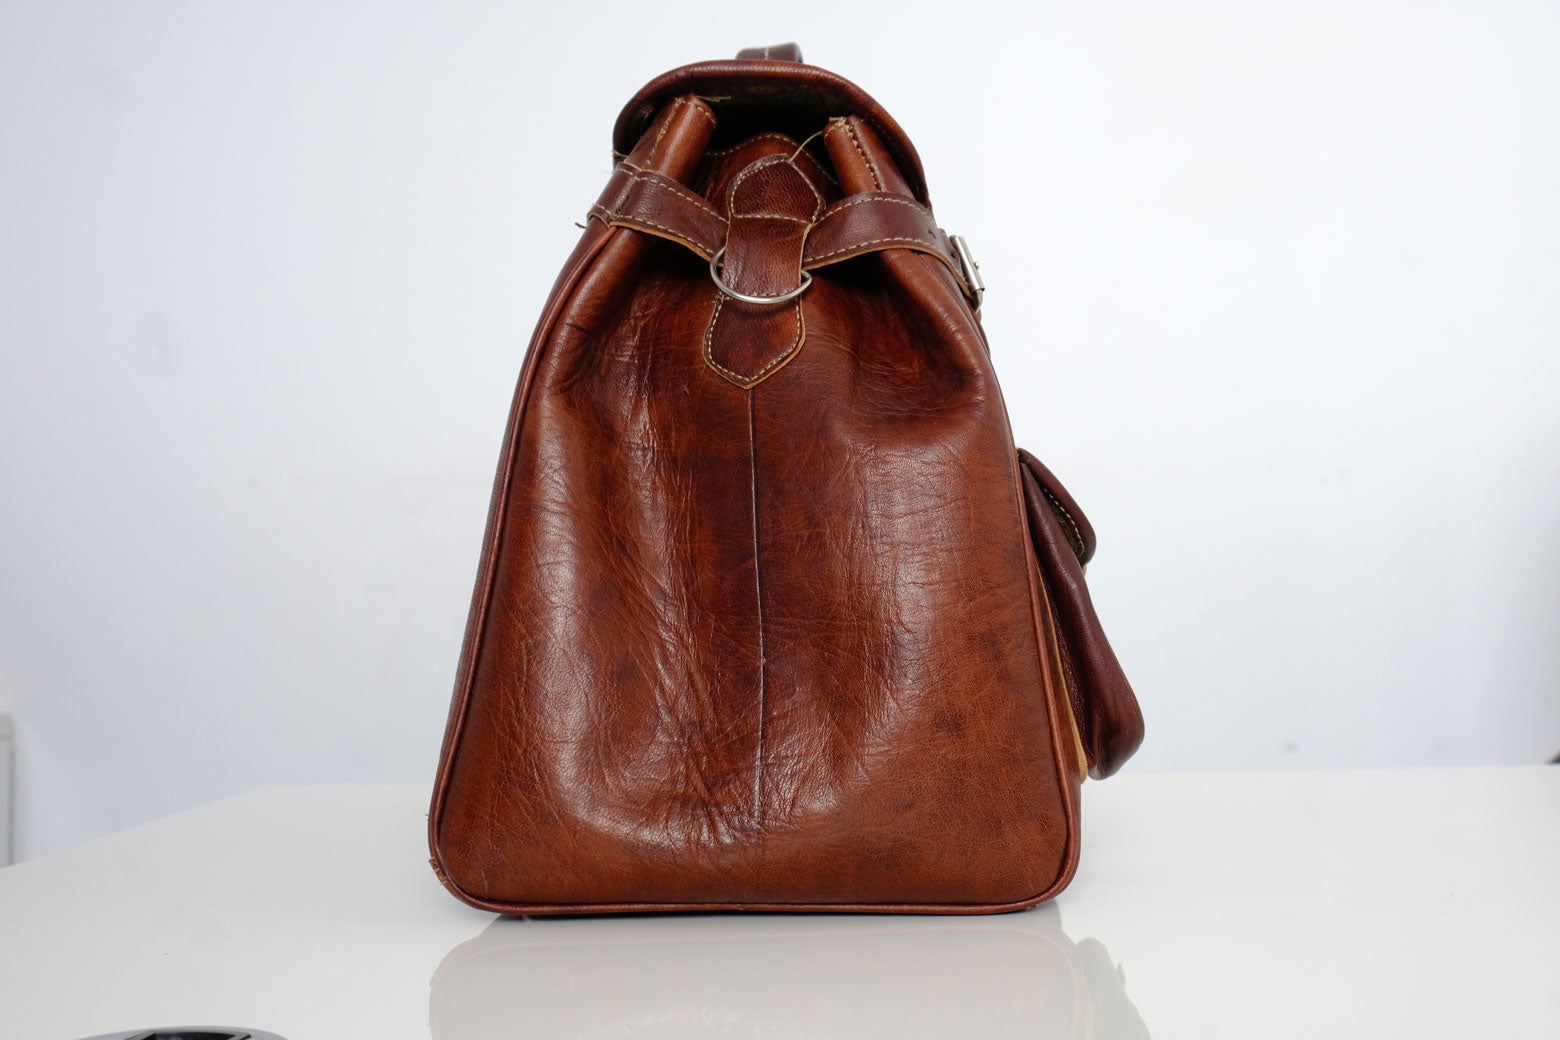 Brown leather travel bag | Summer 2019 - GFM -giftsfrommorocco-morocco leather